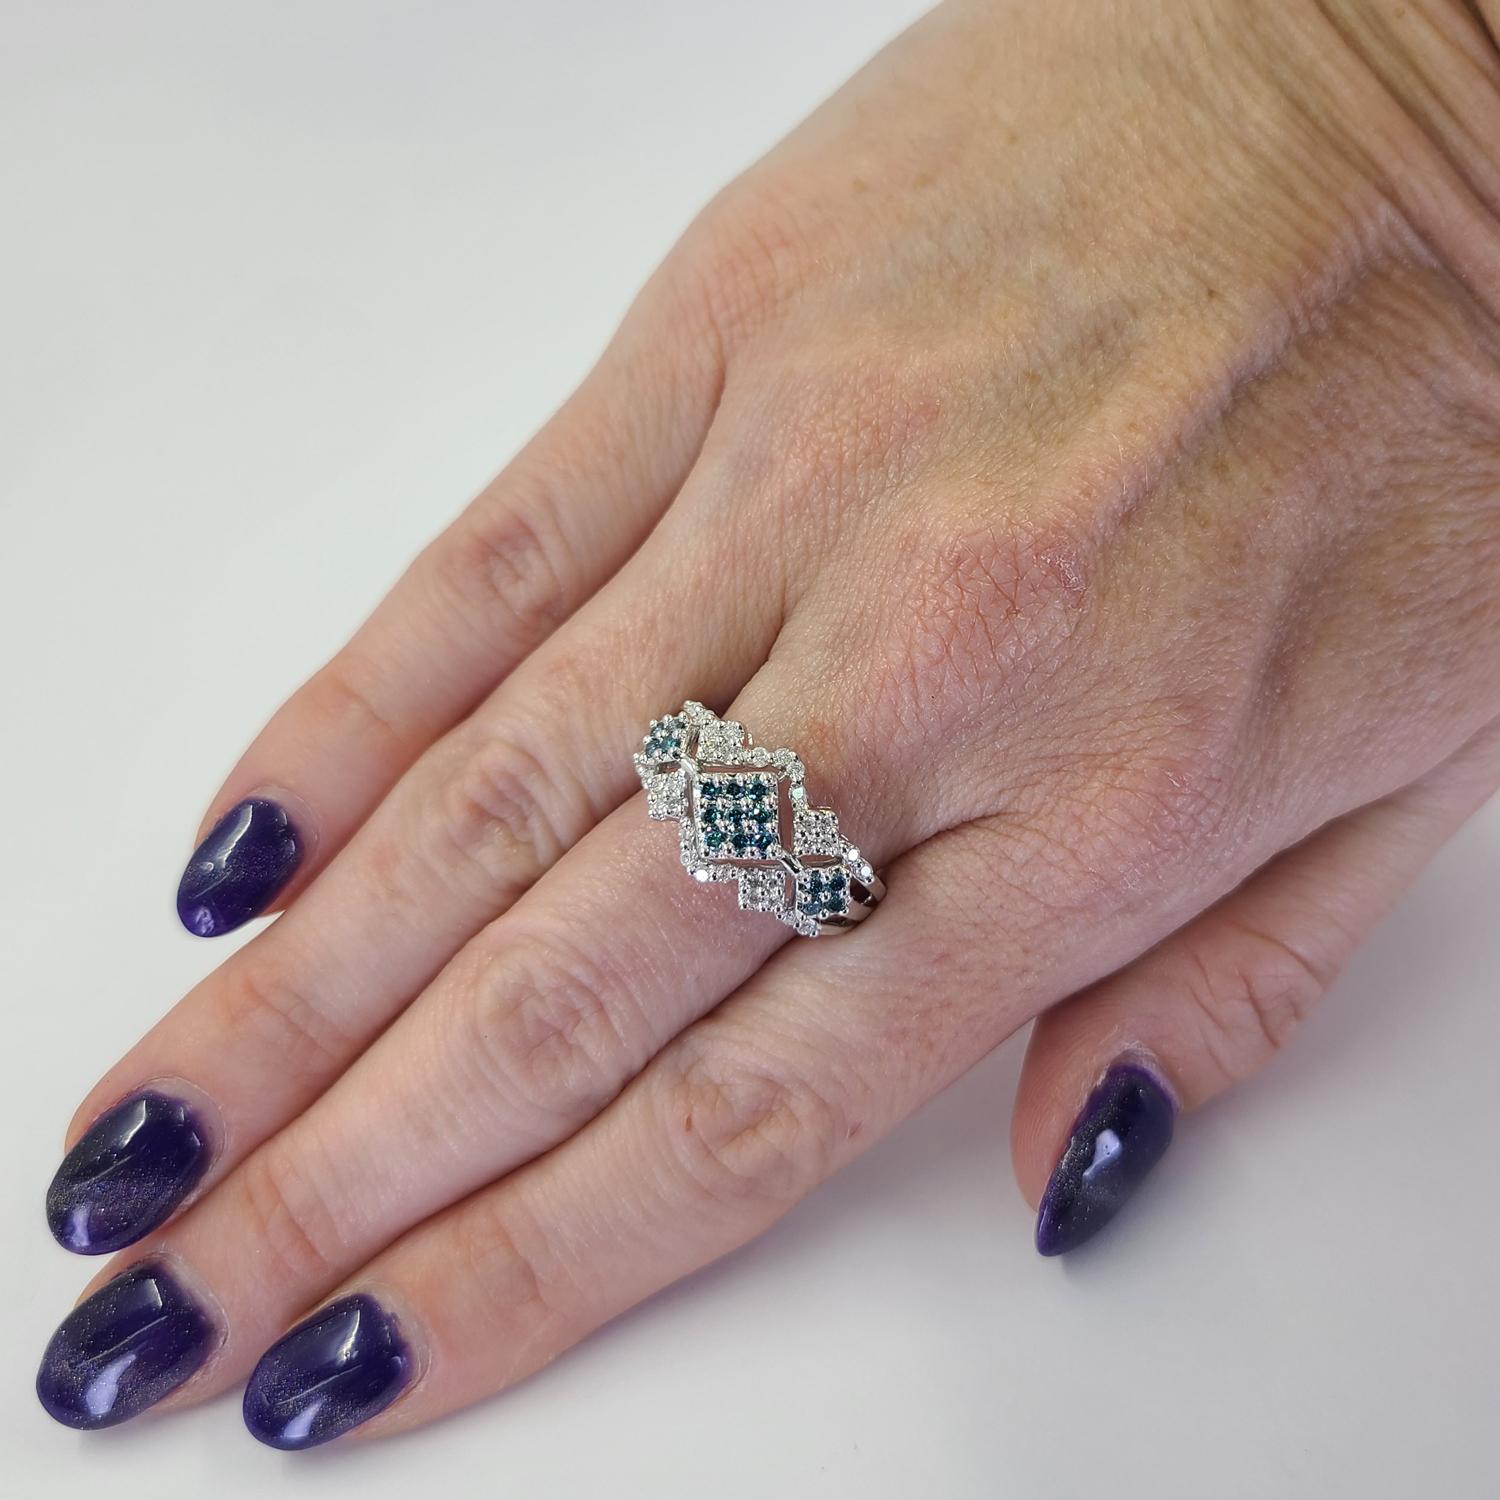 Fun 14 Karat White Gold Ring Featuring 17 Round Treated Teal Diamonds Totaling 0.17 Carats Accented By 32 Round Brilliant Cut Diamonds of SI Clarity and H/I Color Total 0.16 Carats. Current Finger Size 8.5; One Free Sizing Service Included with